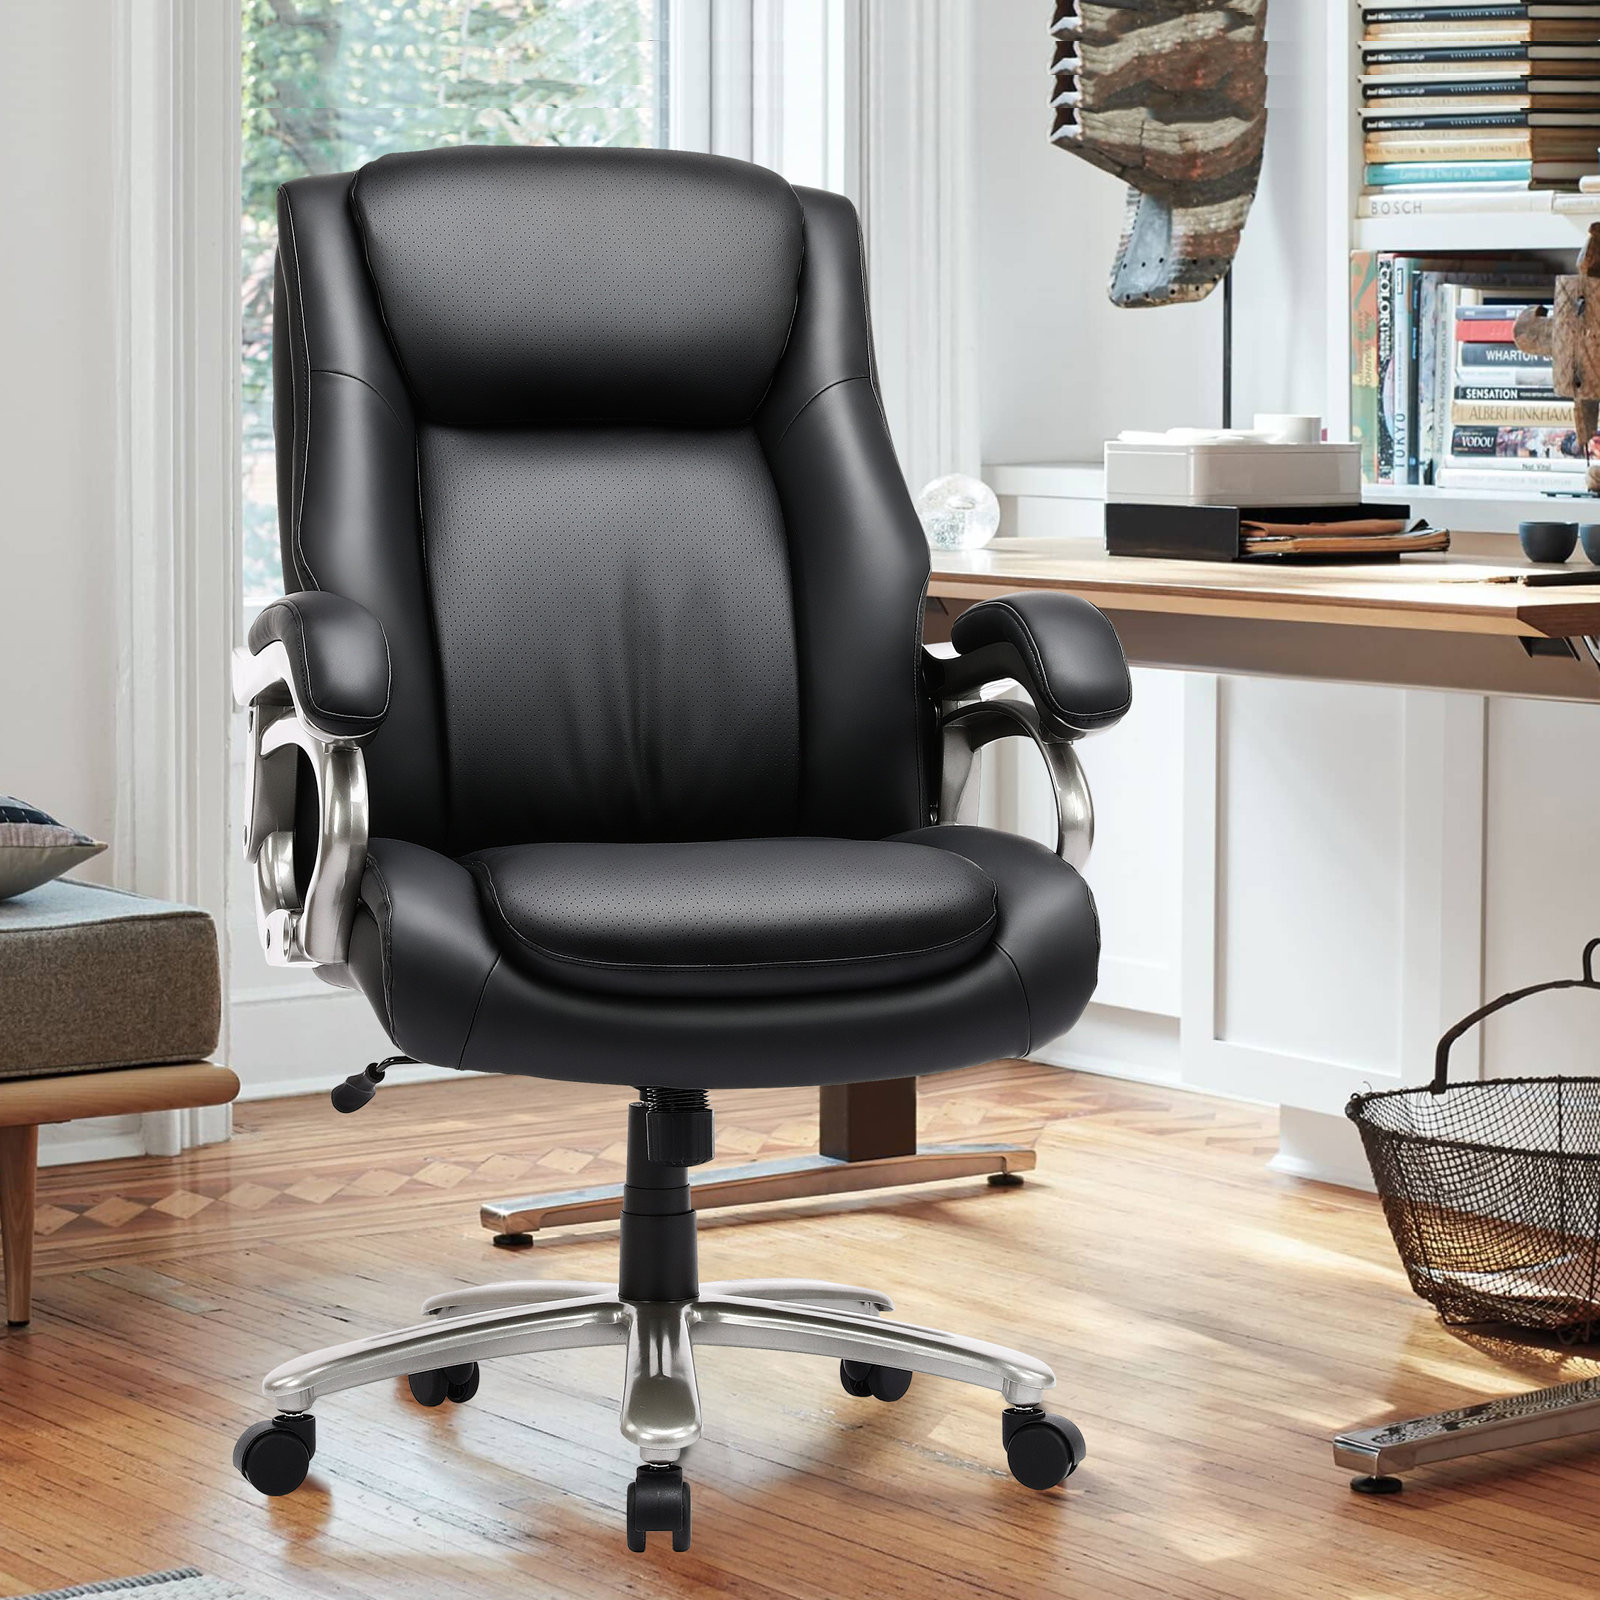 Executive Computer Office Desk Chair High Back Faux Leather Swivel Chair  Black